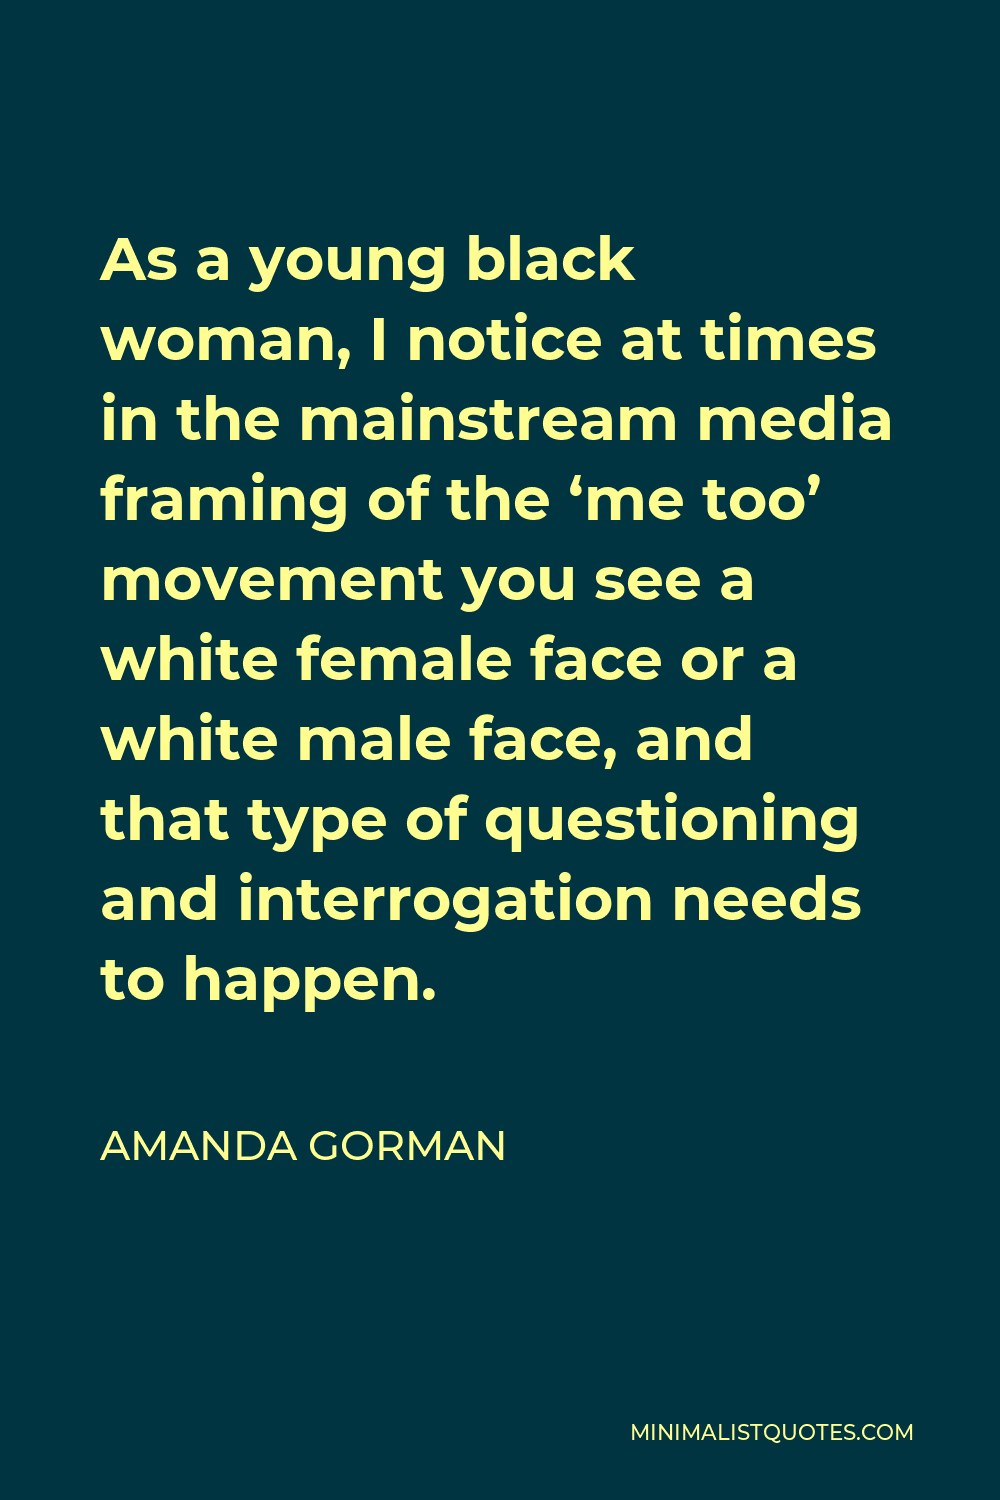 Amanda Gorman Quote - As a young black woman, I notice at times in the mainstream media framing of the ‘me too’ movement you see a white female face or a white male face, and that type of questioning and interrogation needs to happen.